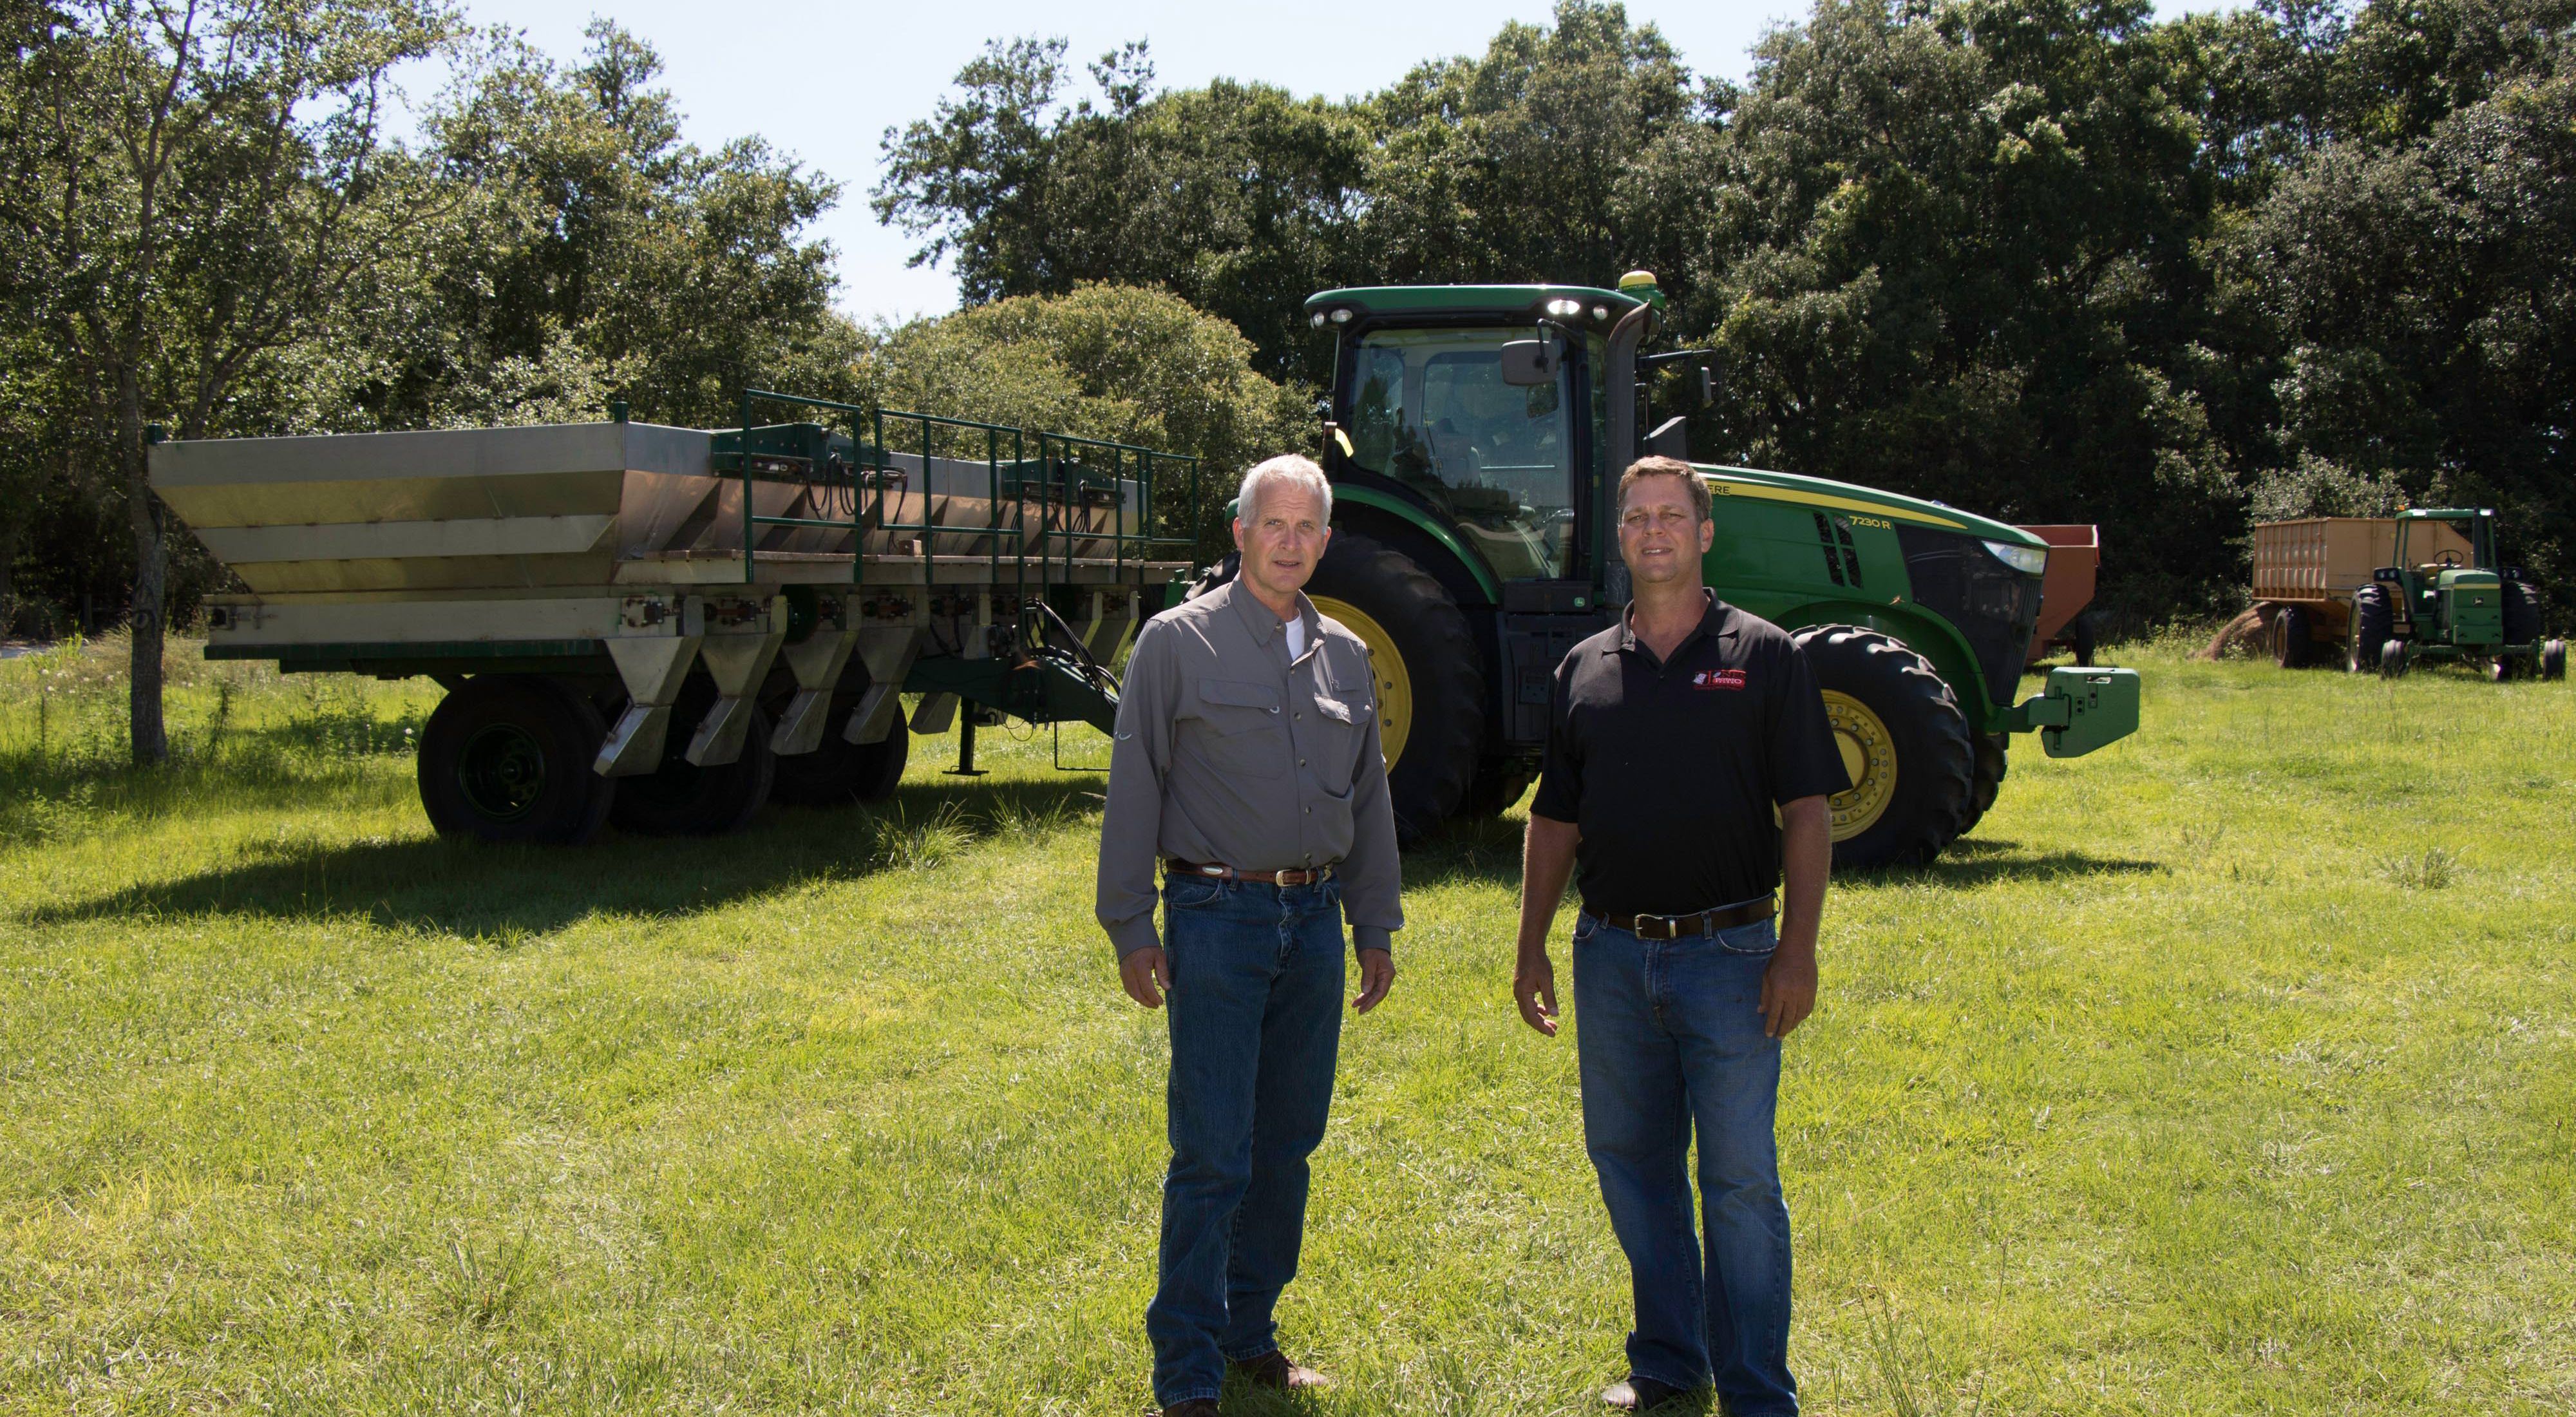 Alan Jones (right) and David Royal, nutrient stewardship manager for The Nature Conservancy in Florida,  in front of a GPS fertilizer drop spreader at Jones Farm.